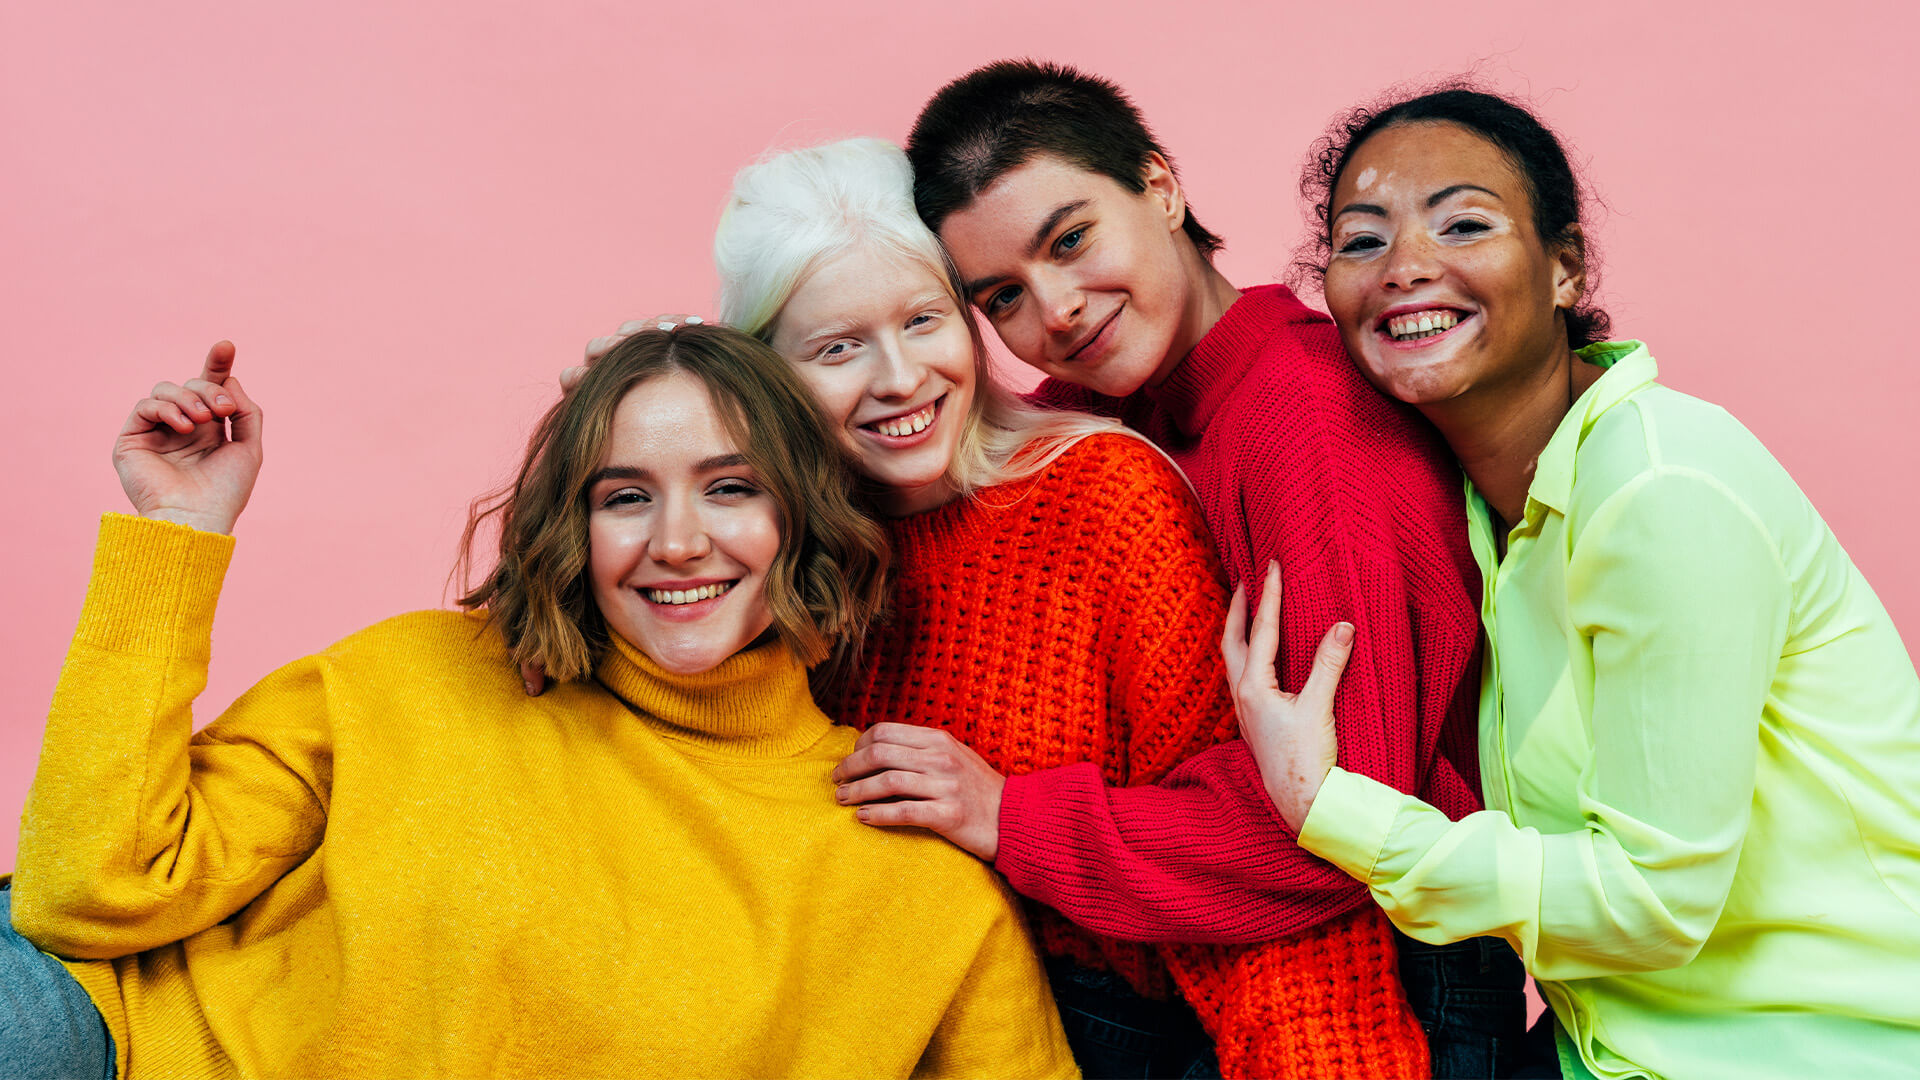 Four women with different body types and looks being happy together